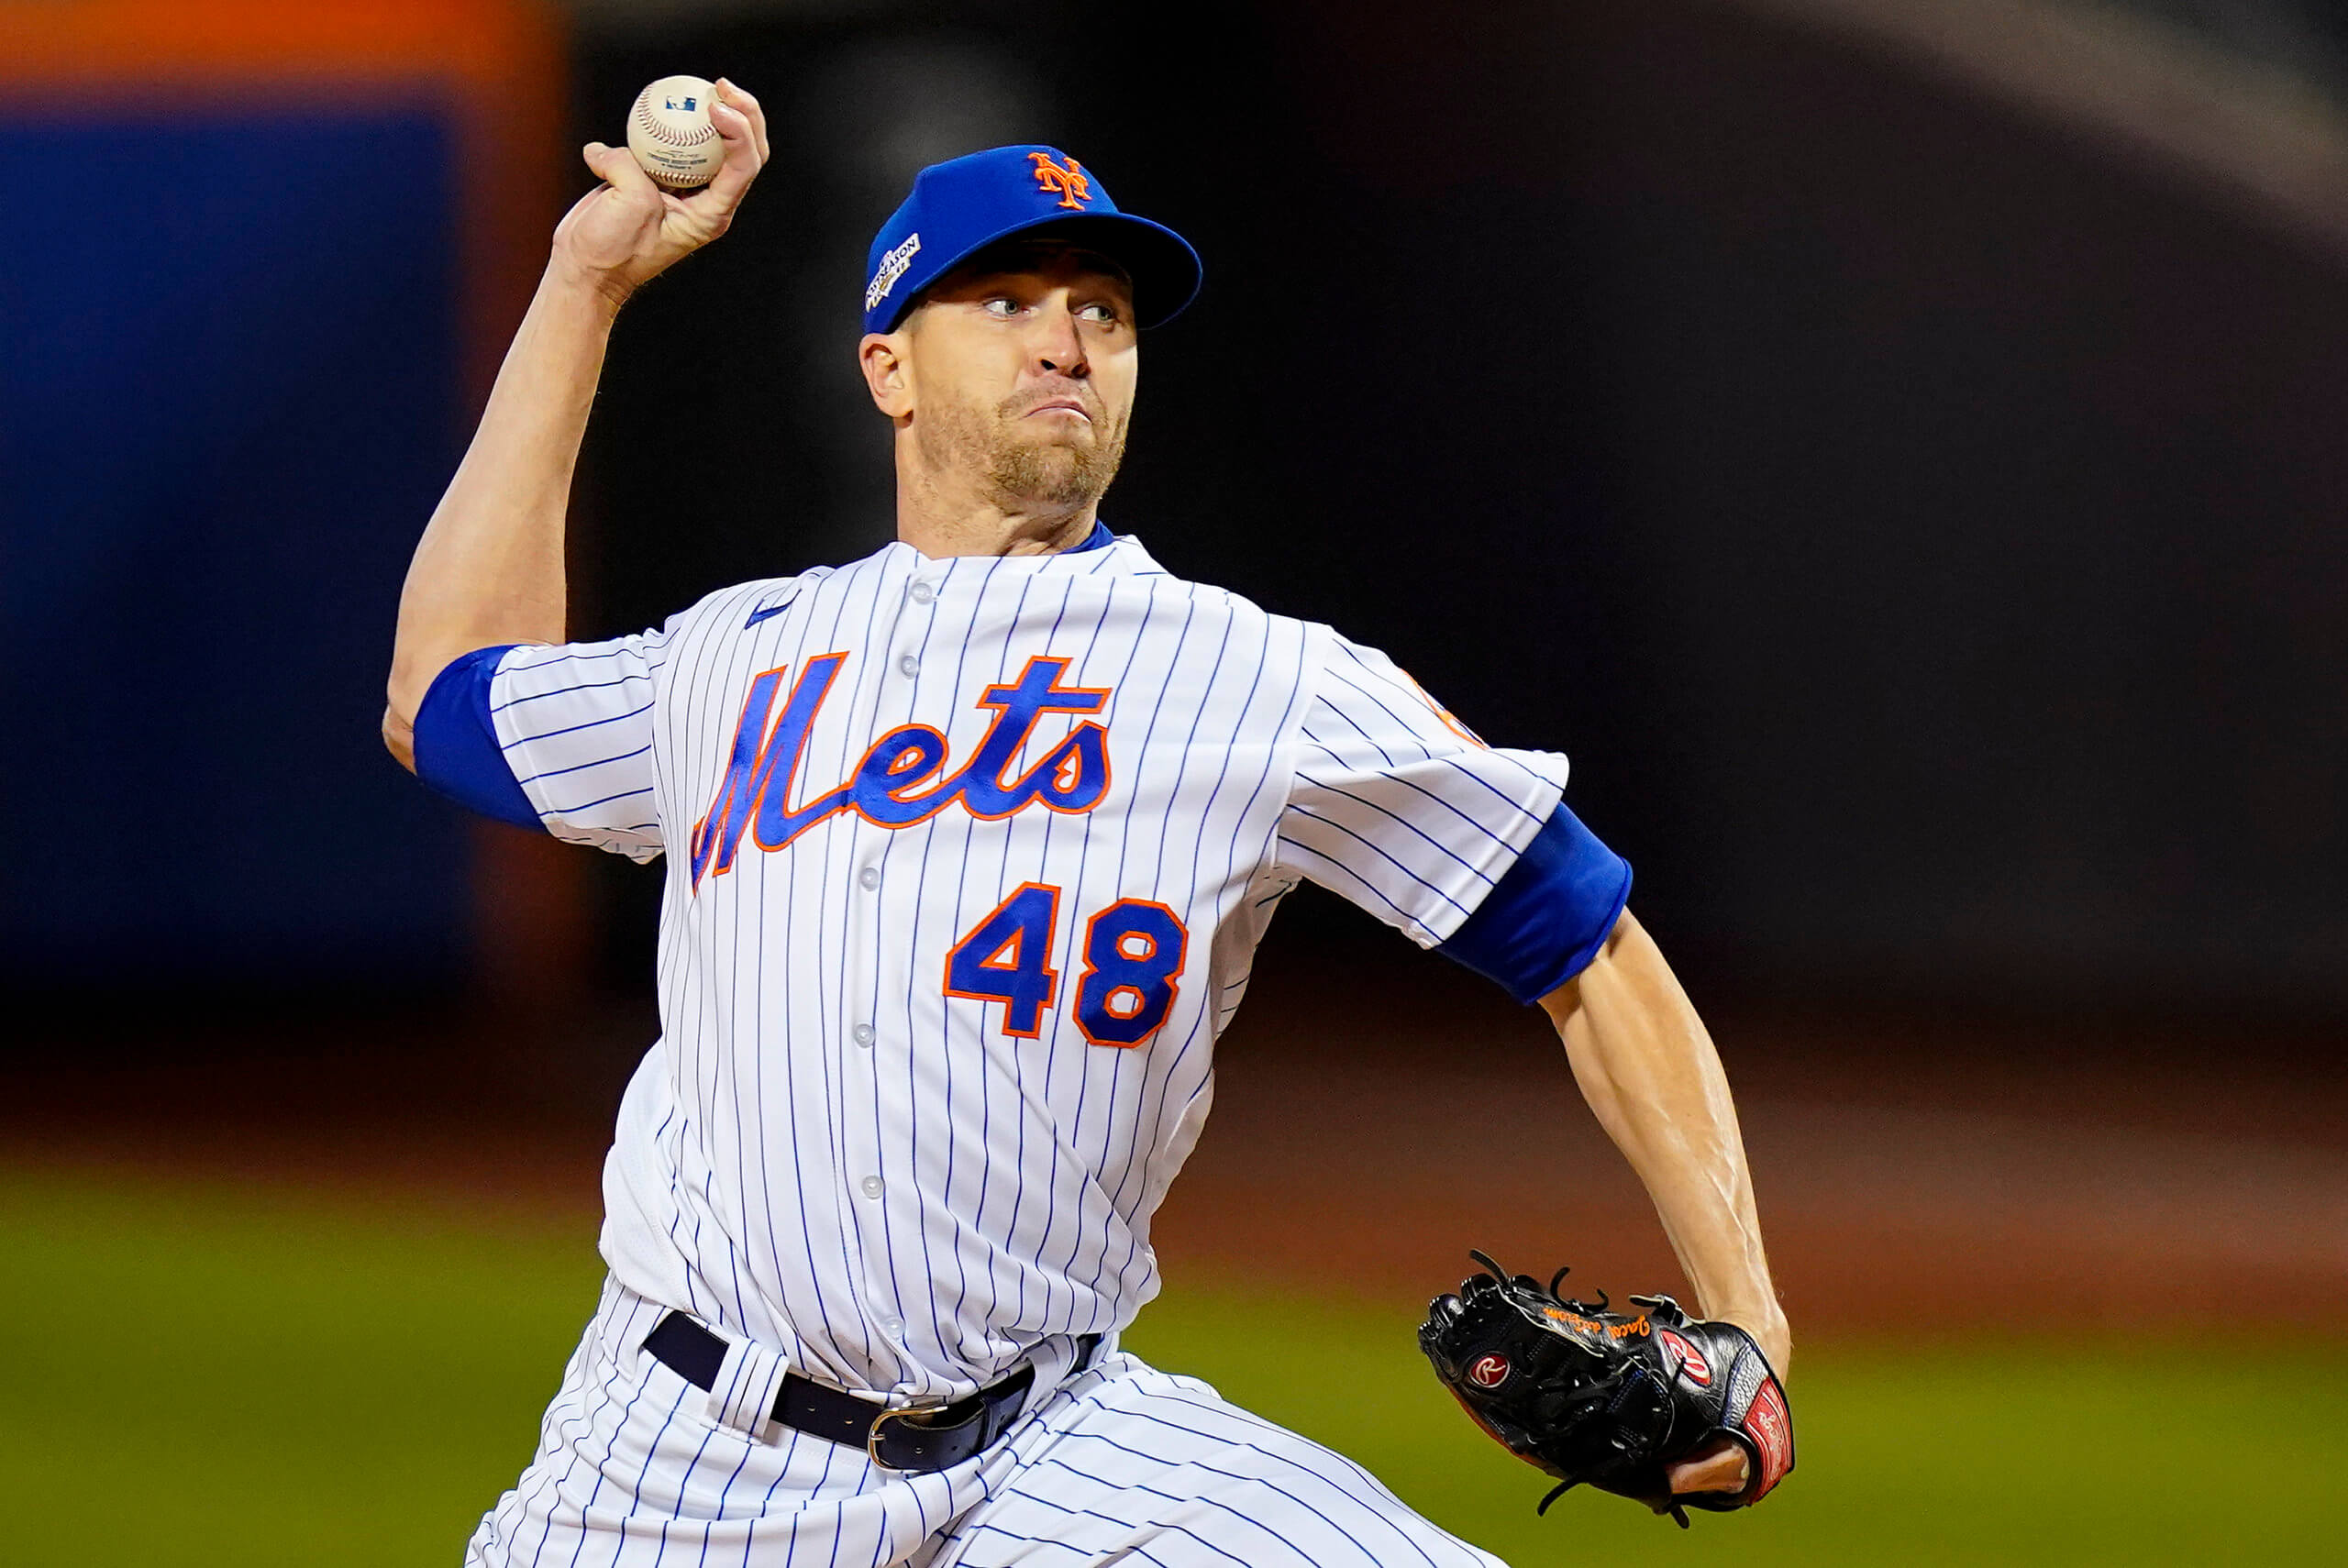 Jacob deGrom's Patience Has Handsomely Paid Off With A $137.5 Million  Contract Extension